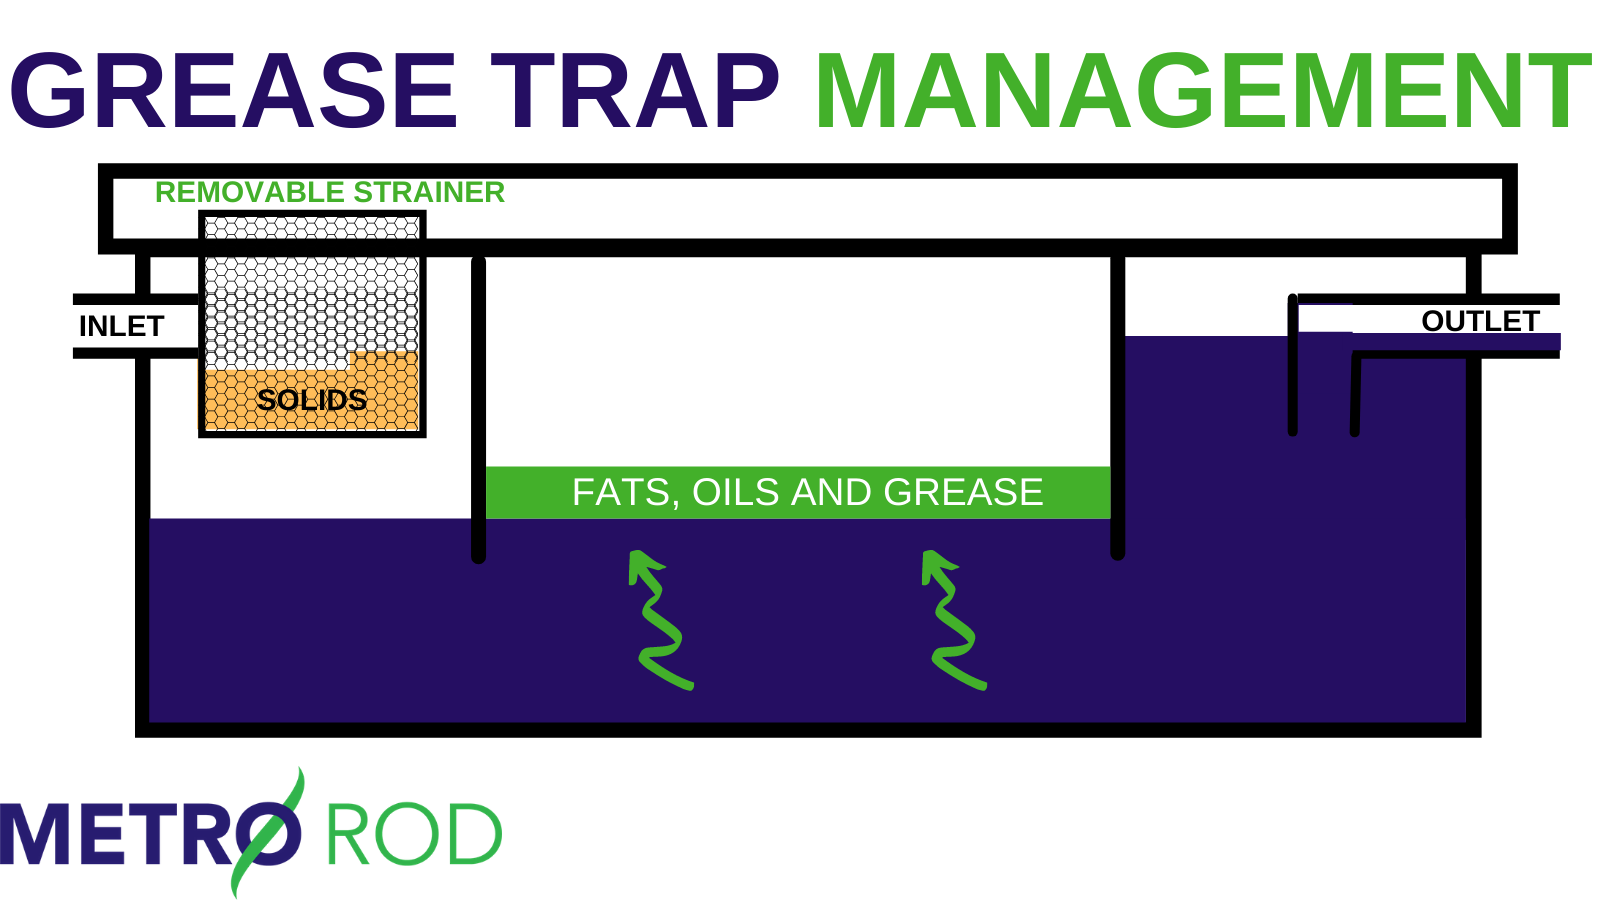 Grease Trap Cleaning: How often and Procedure